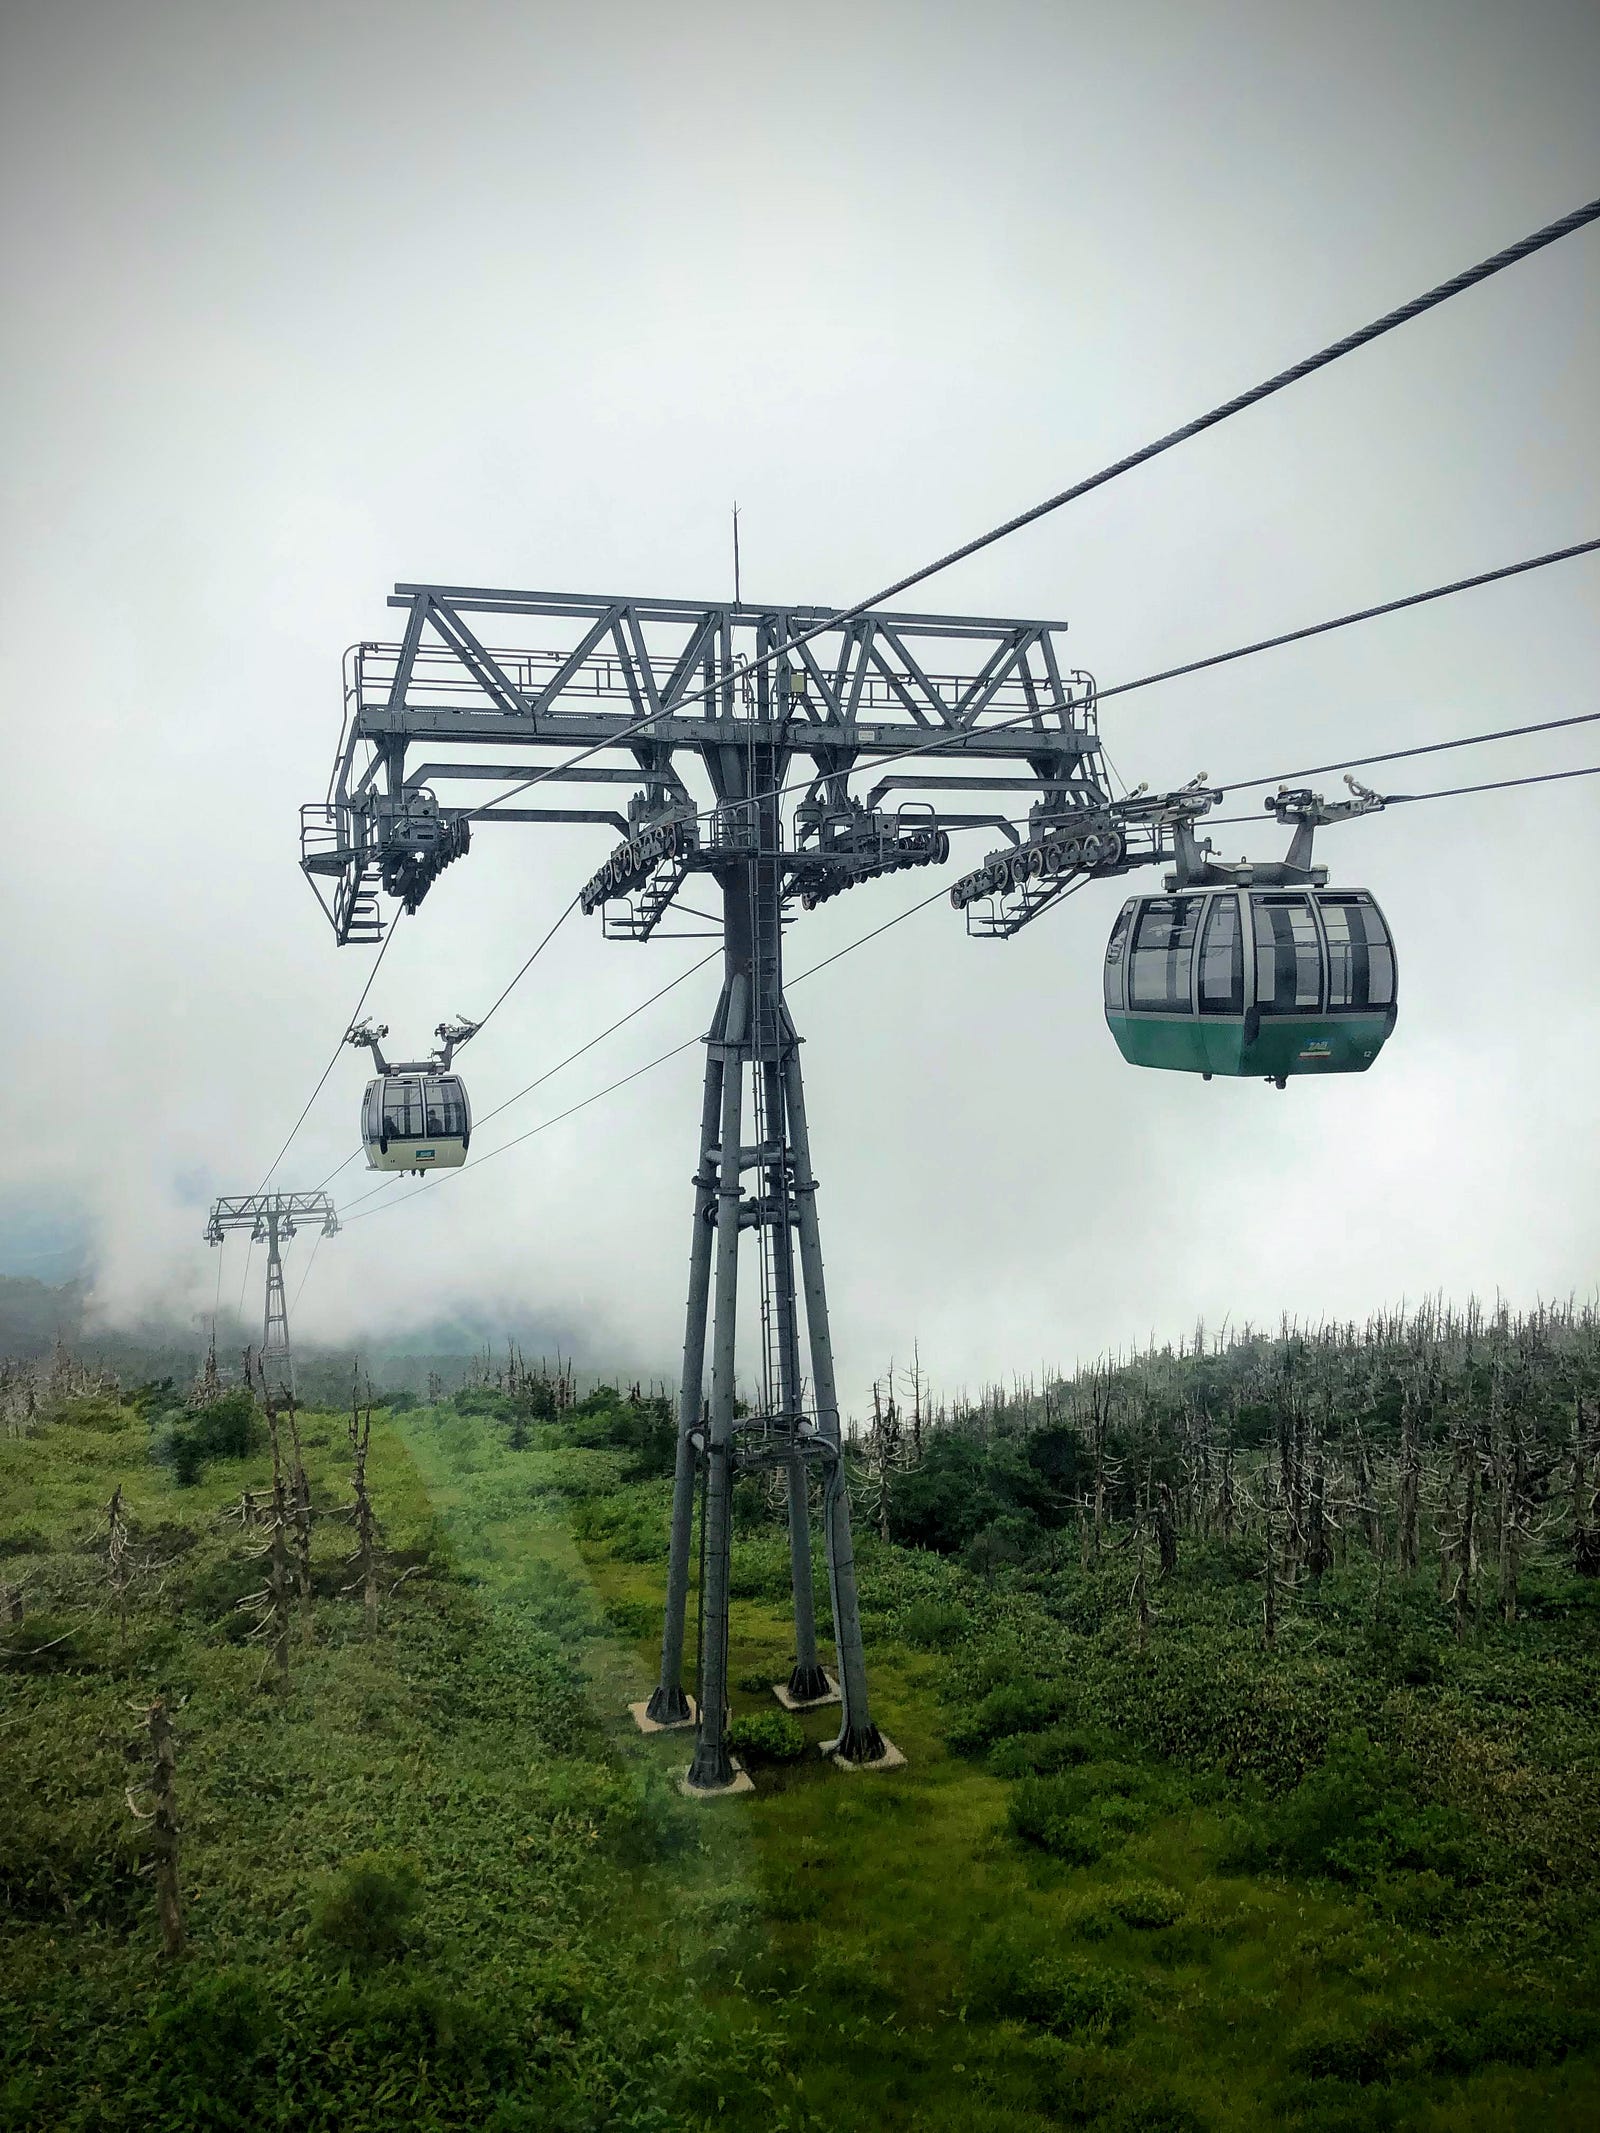 The Zao Ropeway seen from Jizo Sancho Station, a giant gondola that comes out of the clouds with the bright green of summer and white fir trees that turn into the Zao snow monsters.